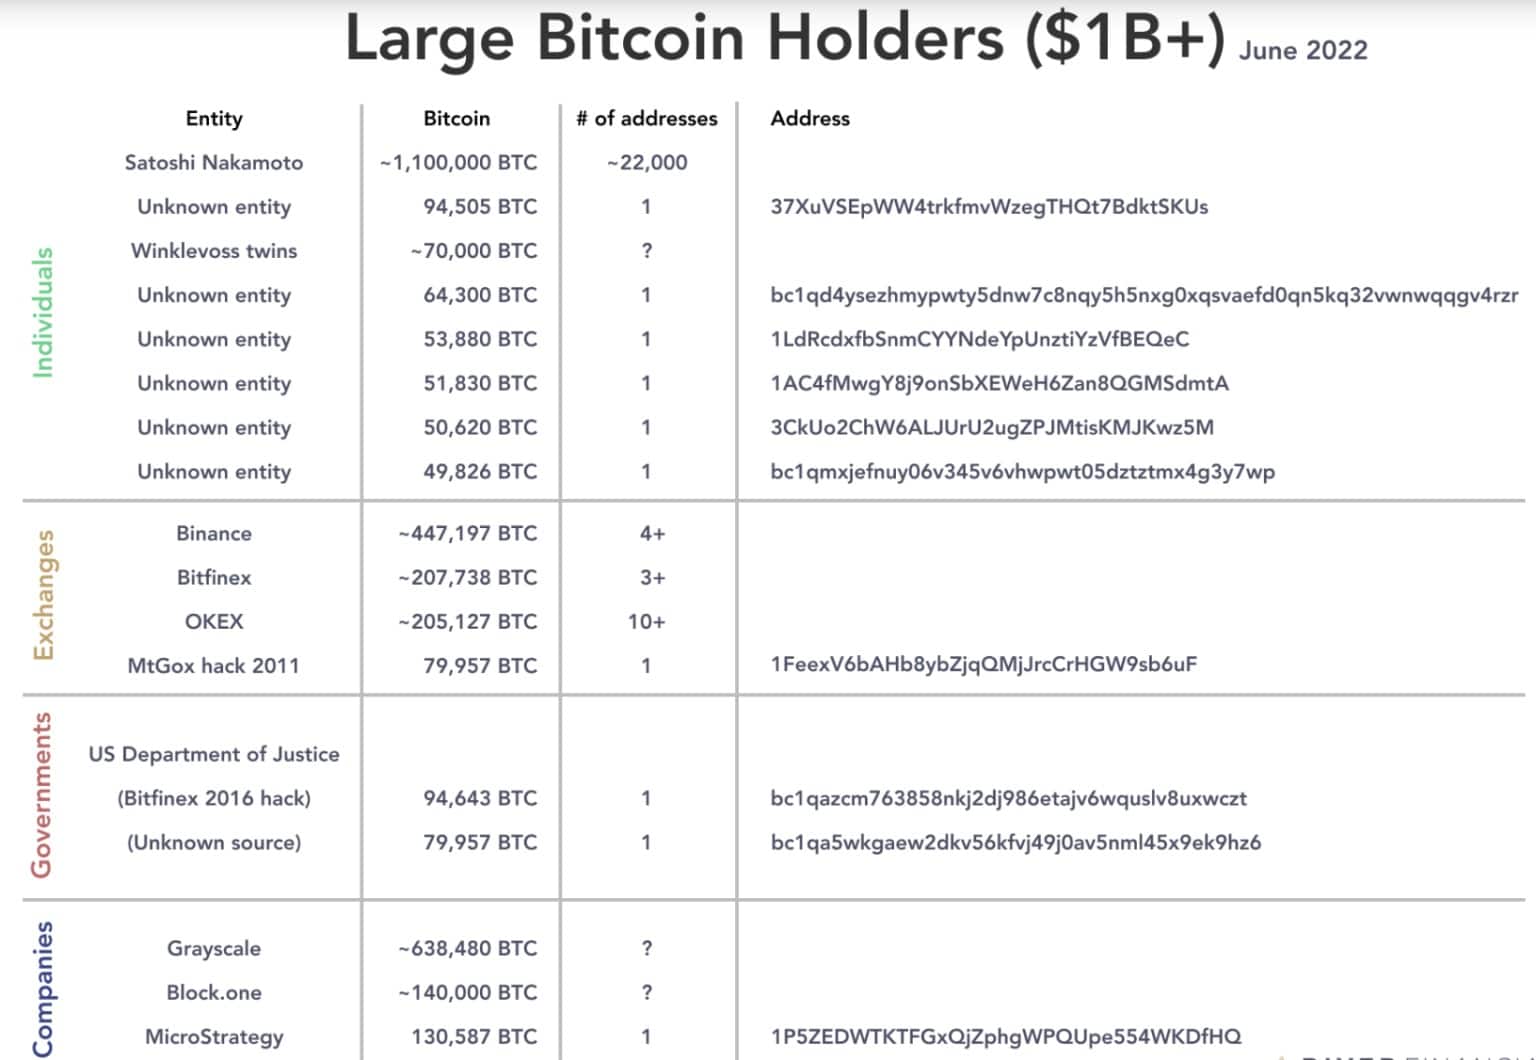 Largest Bitcoin Holders as of June 2022